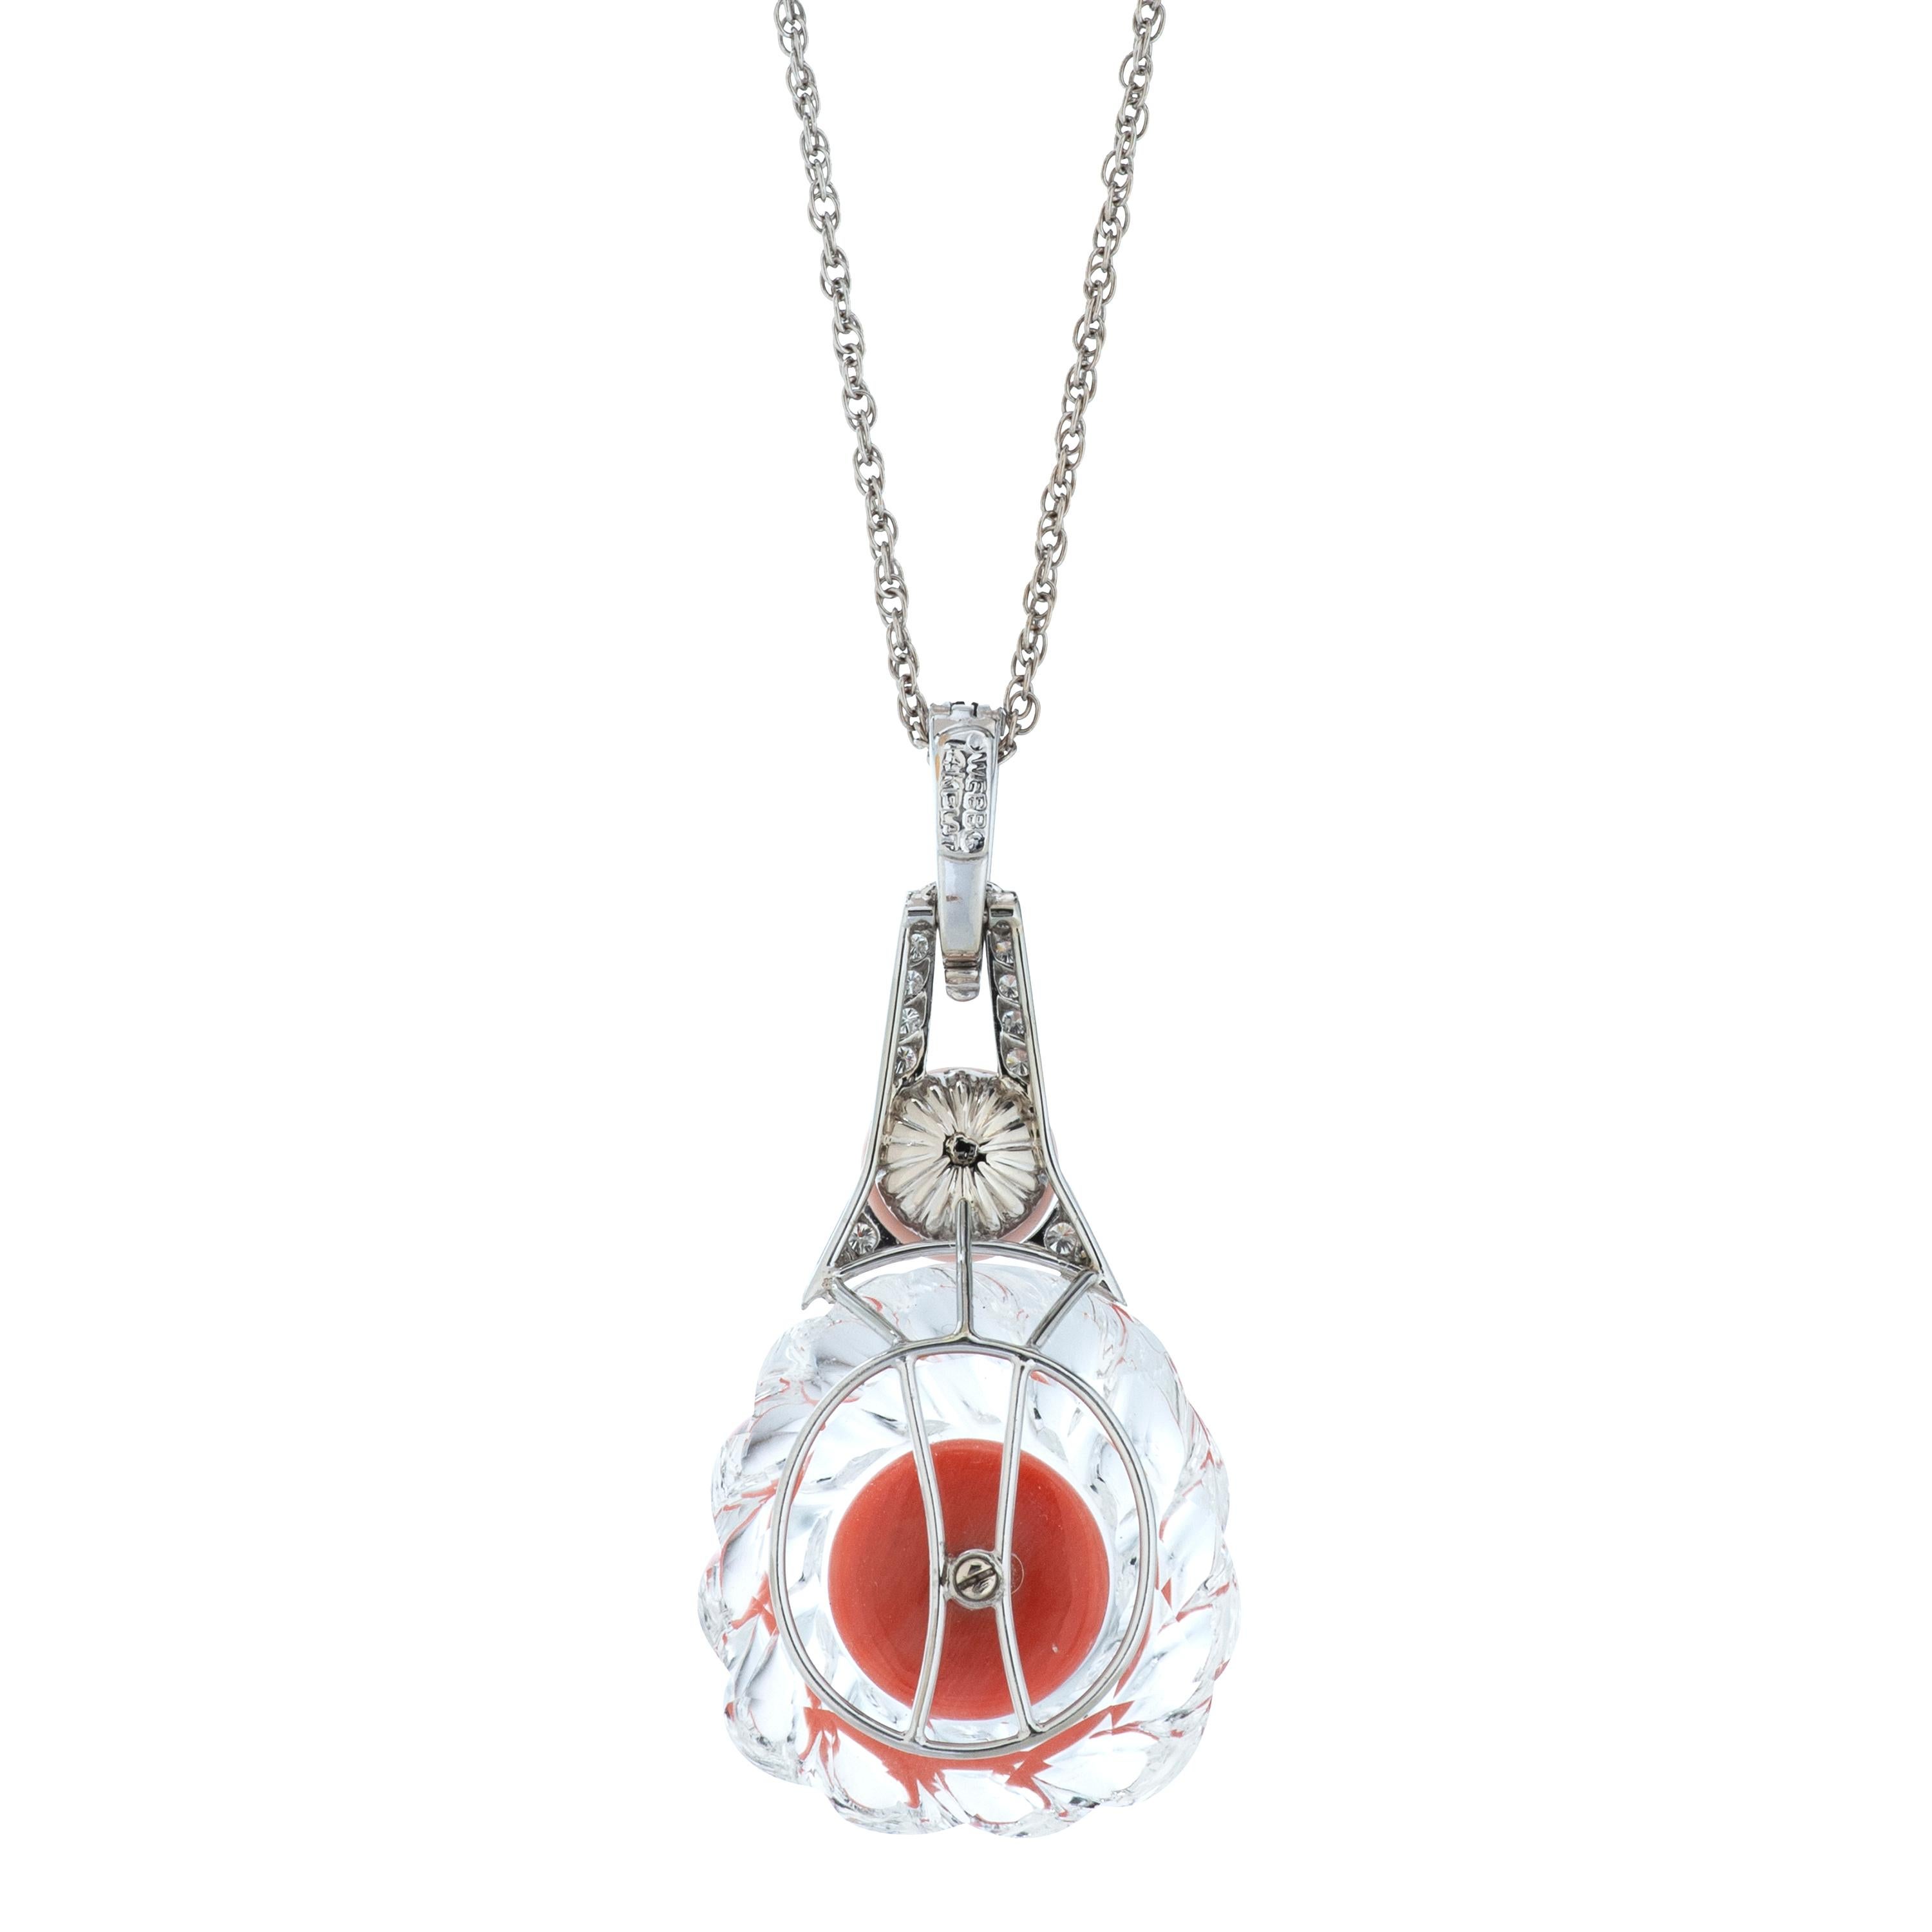 Round Cut David Webb Rock Crystal, Coral, Angelskin Coral and Diamond Pendant Necklace For Sale